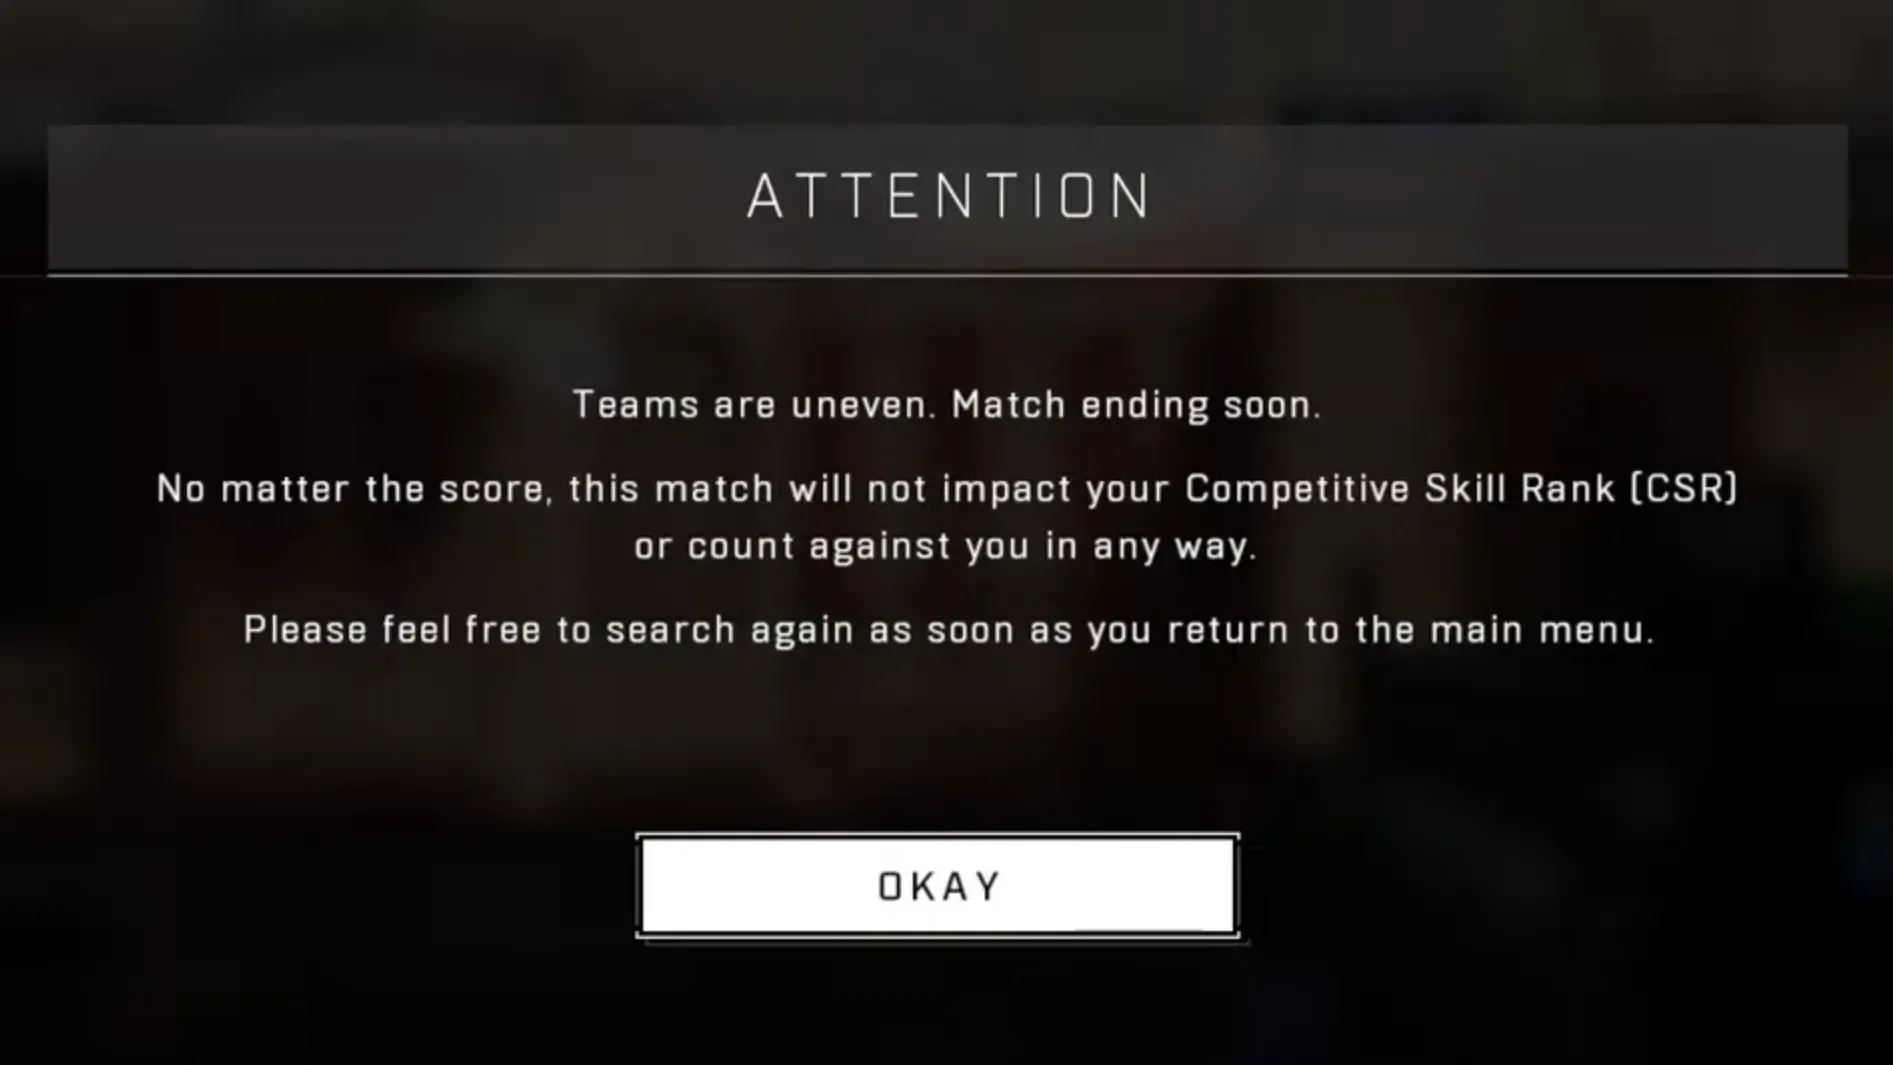 UNEVEN RANKED MATCHES NOW END AUTOMATICALLY